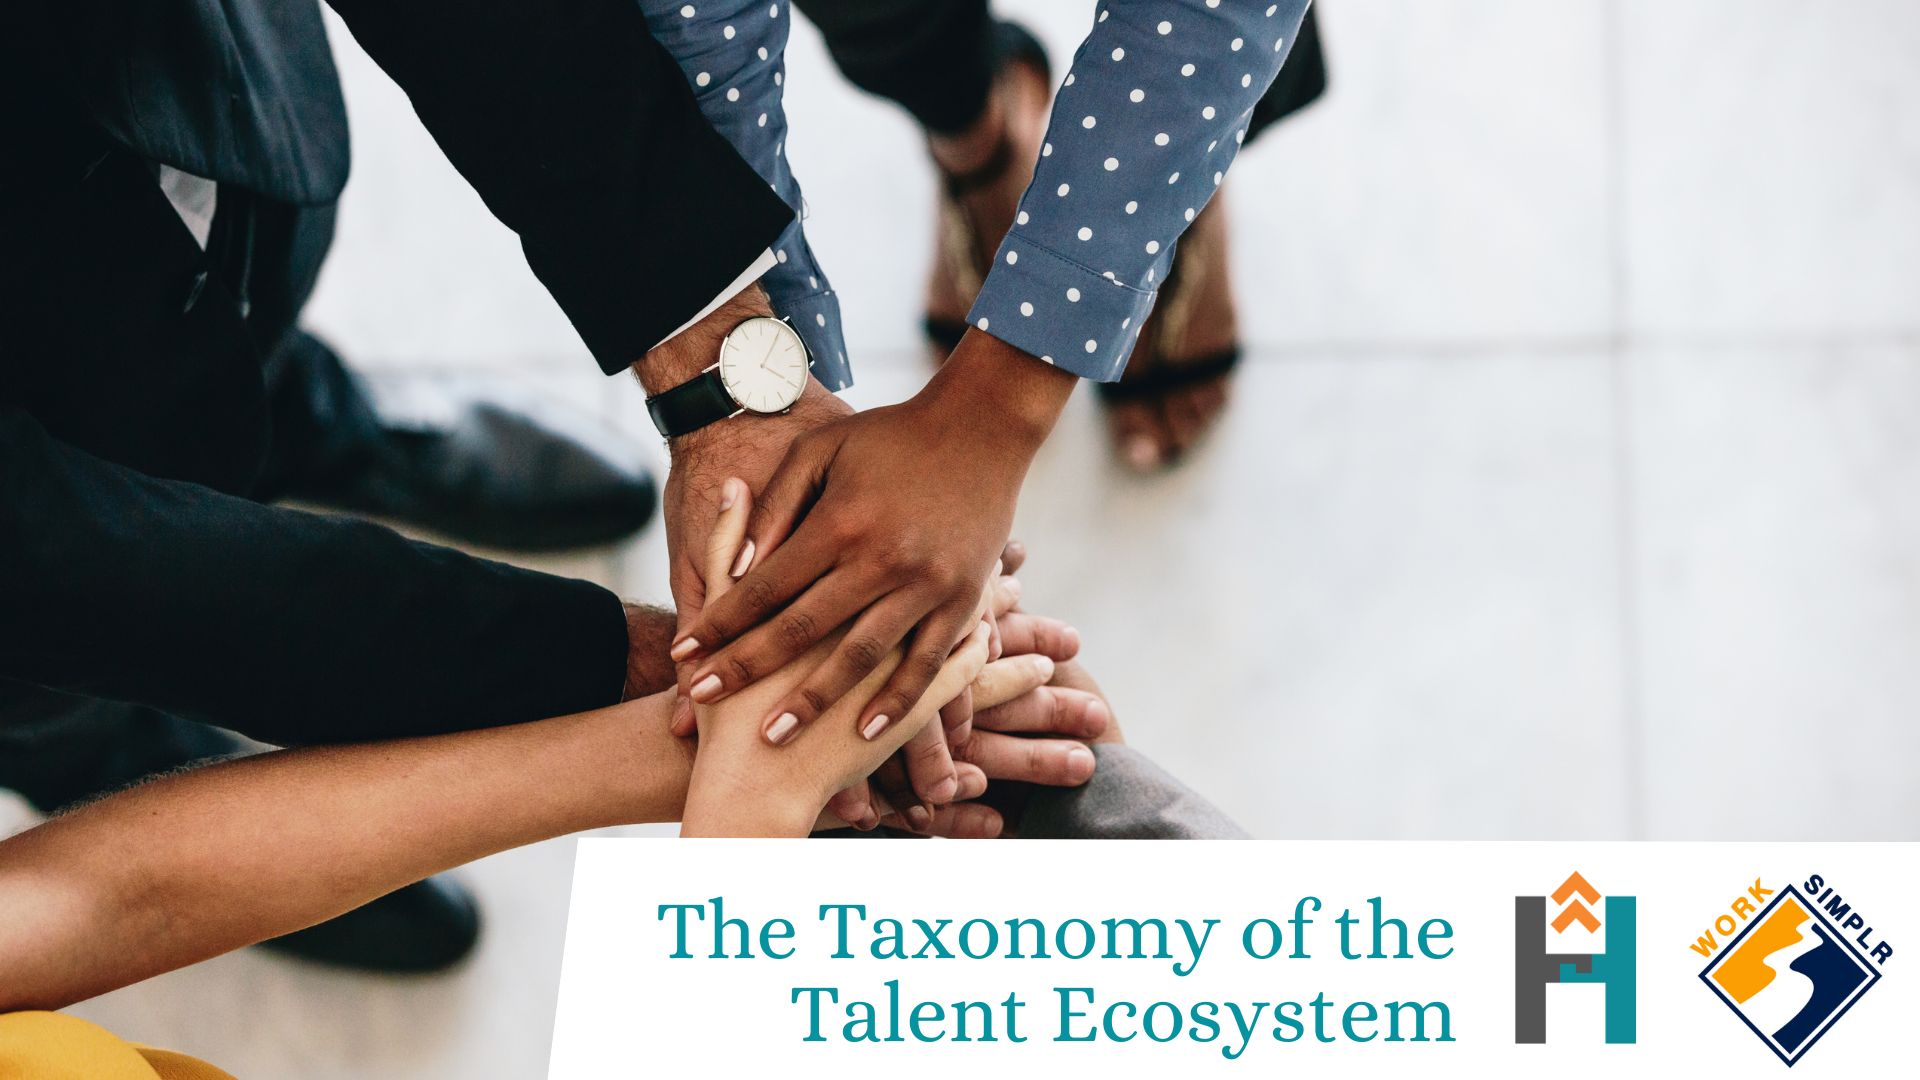 The Taxonomy of the Talent Ecosystem